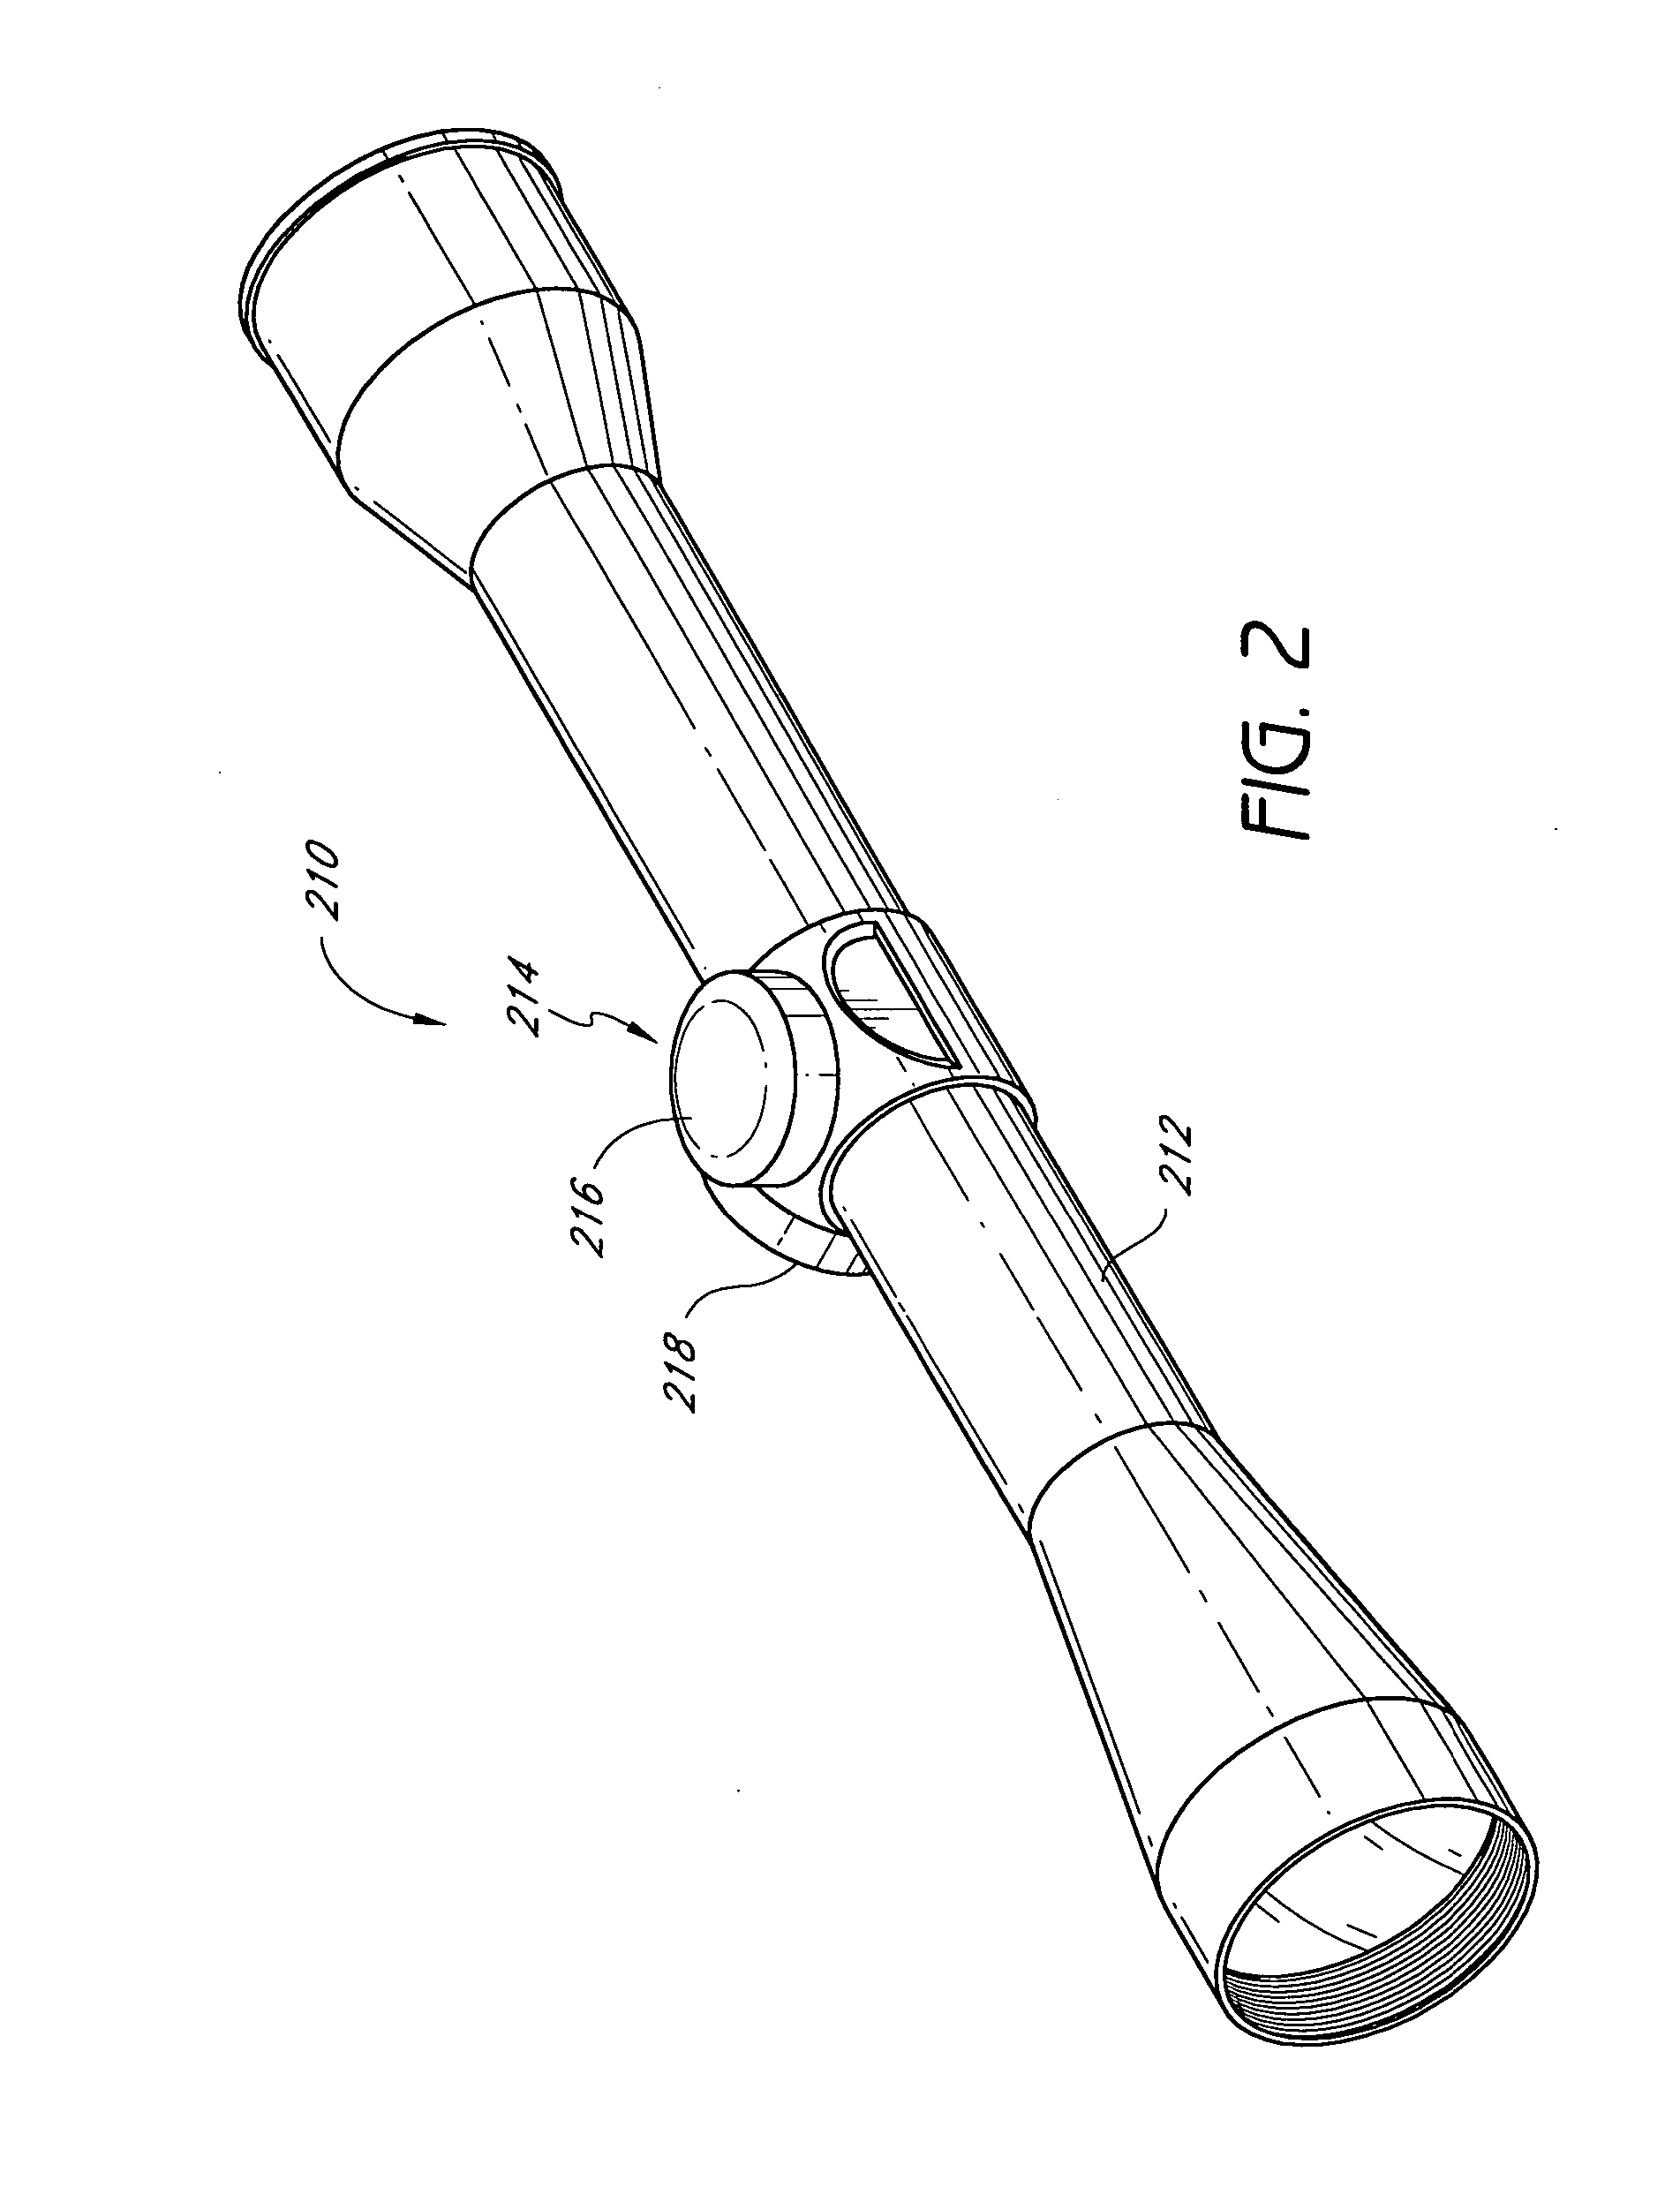 Systems and methods for adjusting a sighting device